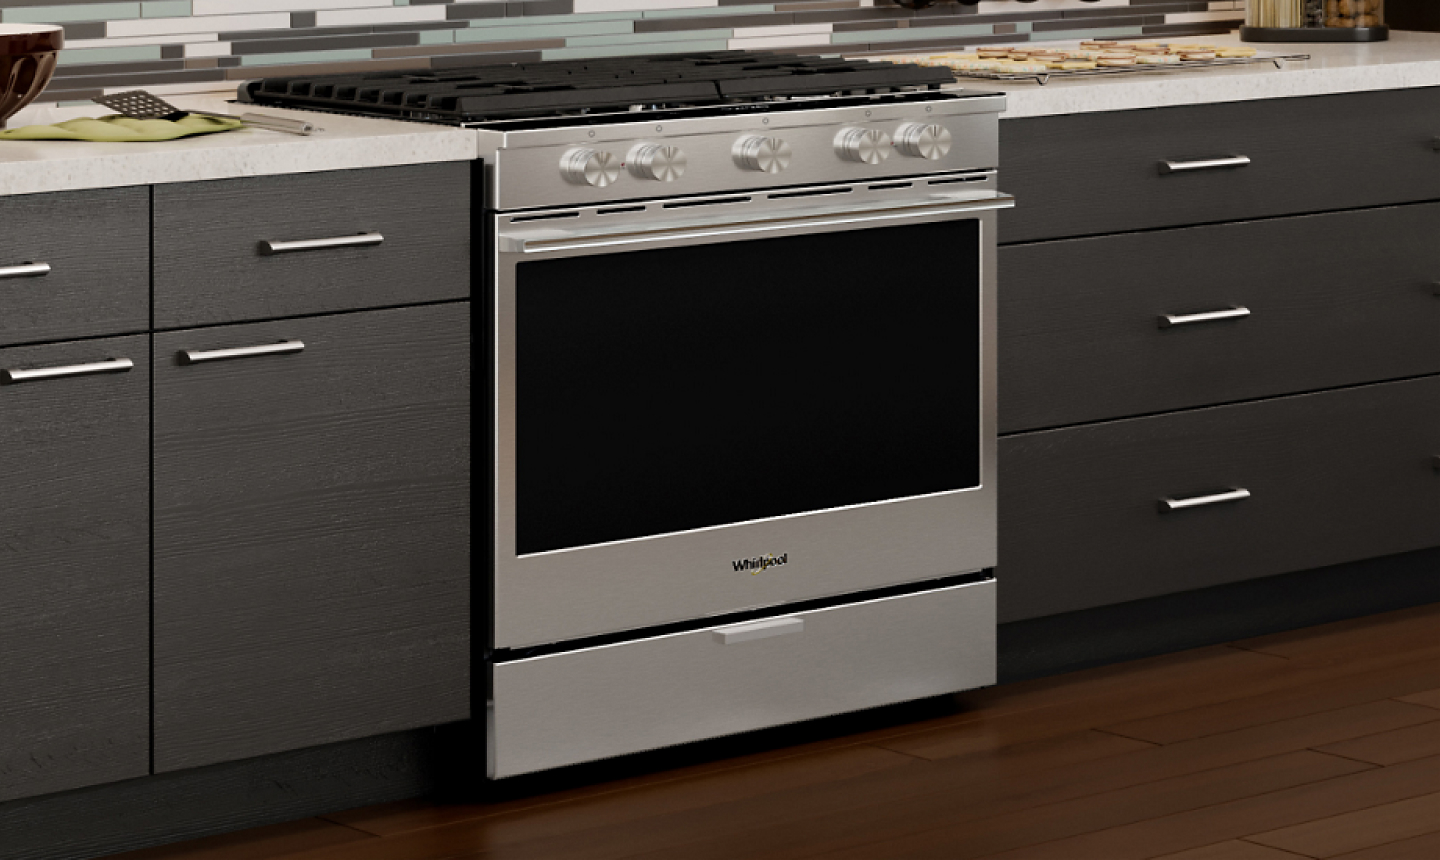 Silver gas stove from Whirlpool brand surrounded by brown cabinetry